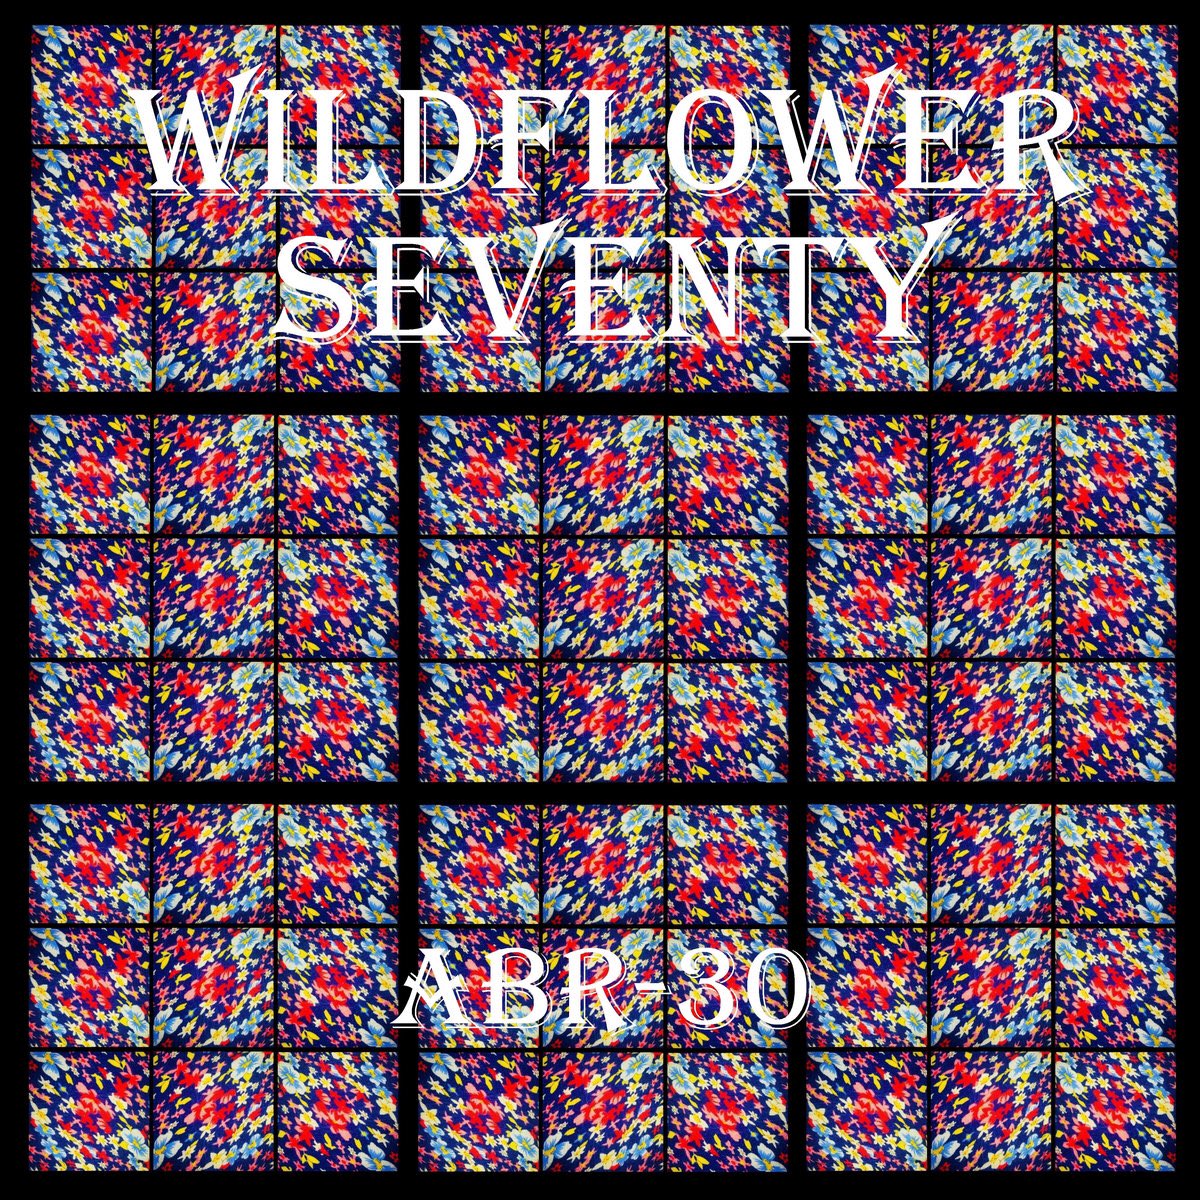 Discover your new favourite artist, and support independent and underground music today! WILDFLOWER SEVENTY, released in 2020, an eclectic music sampler featuring The Bonnie Situations, @RAVENOUSHOUNDS, and more! thealdorabritainrecords.bandcamp.com/album/wildflow… #supportindependentmusic 💛🖤💛